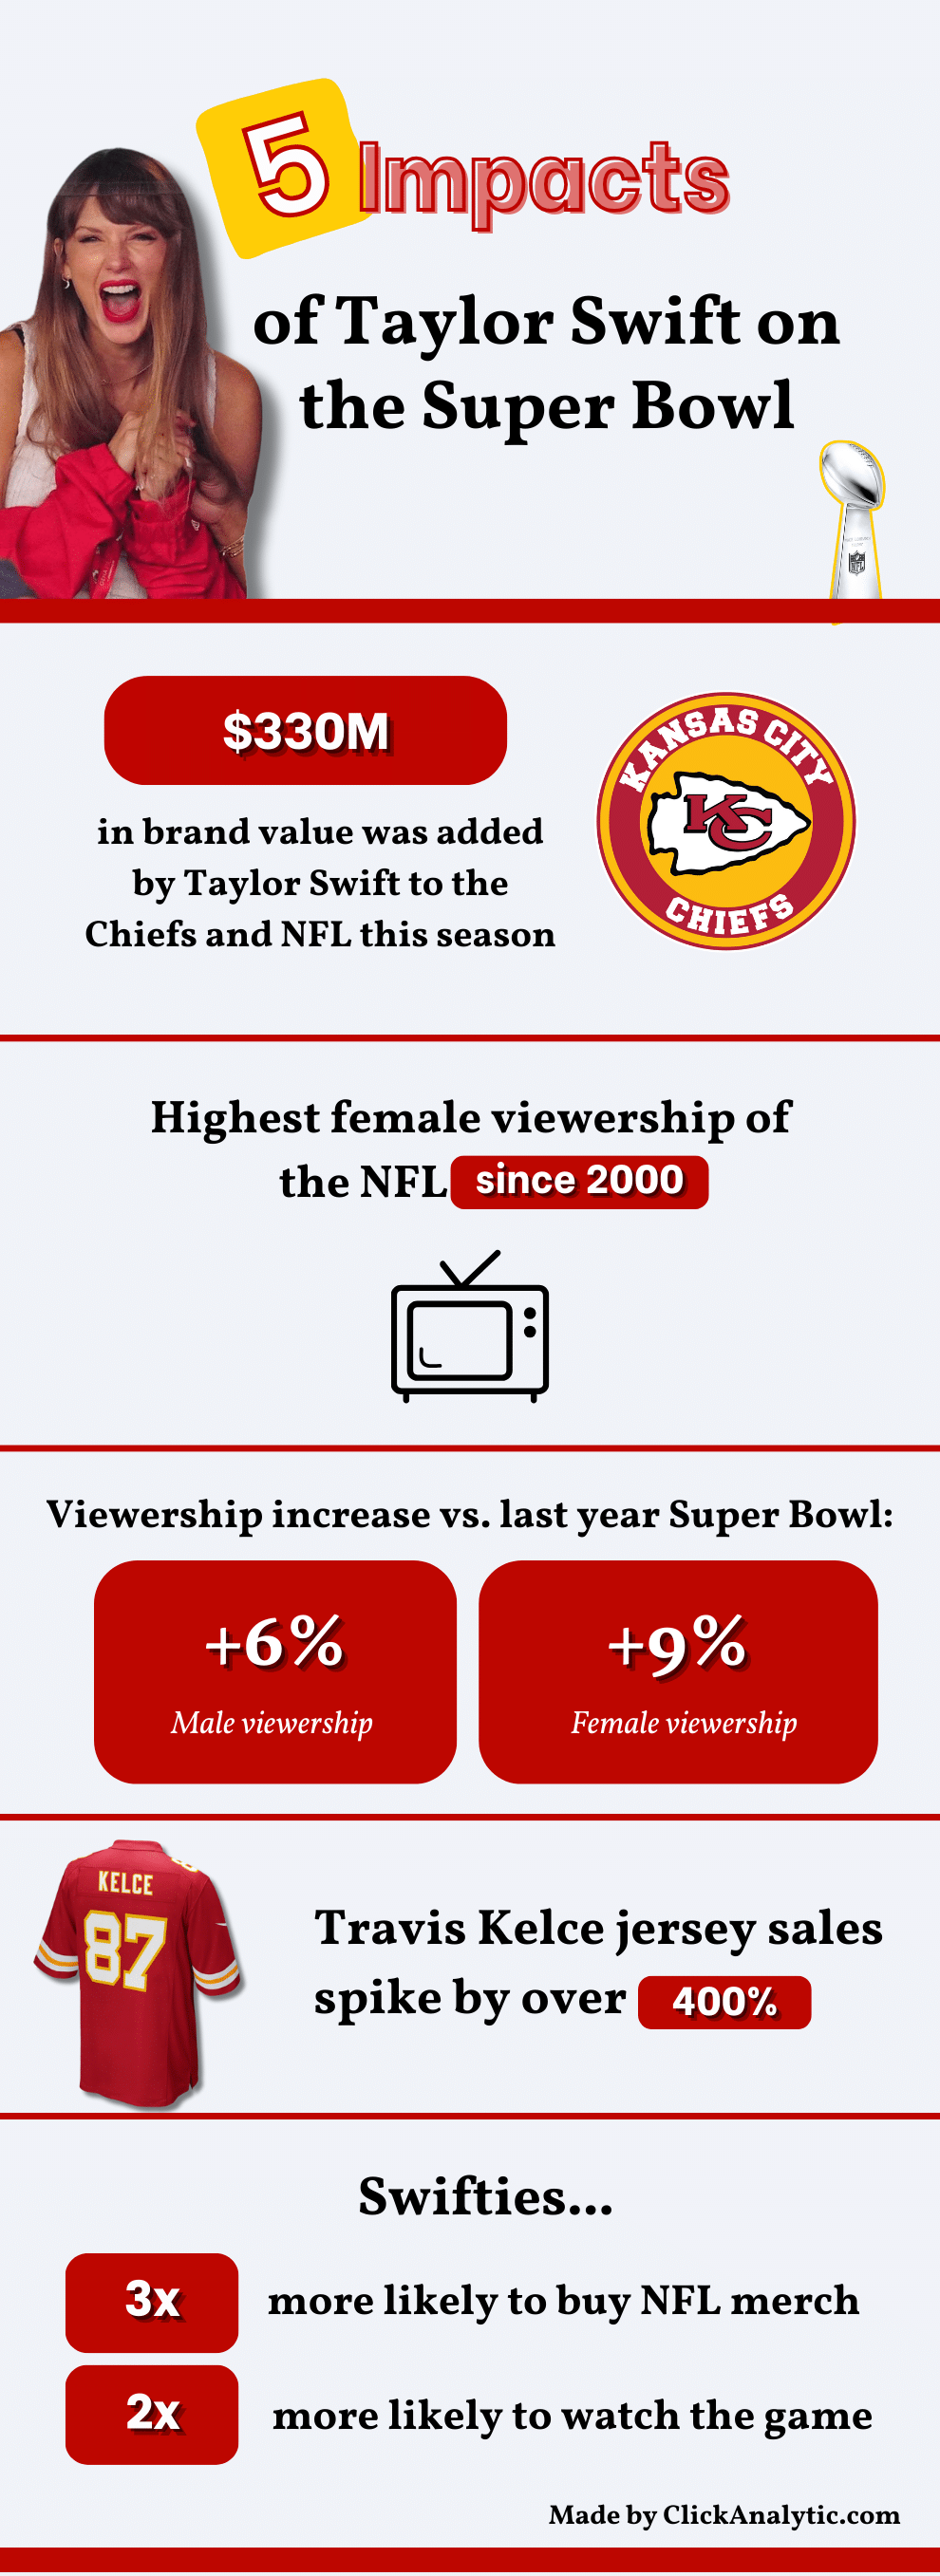 Taylor Swift and her impact on the NFL - An Infographic